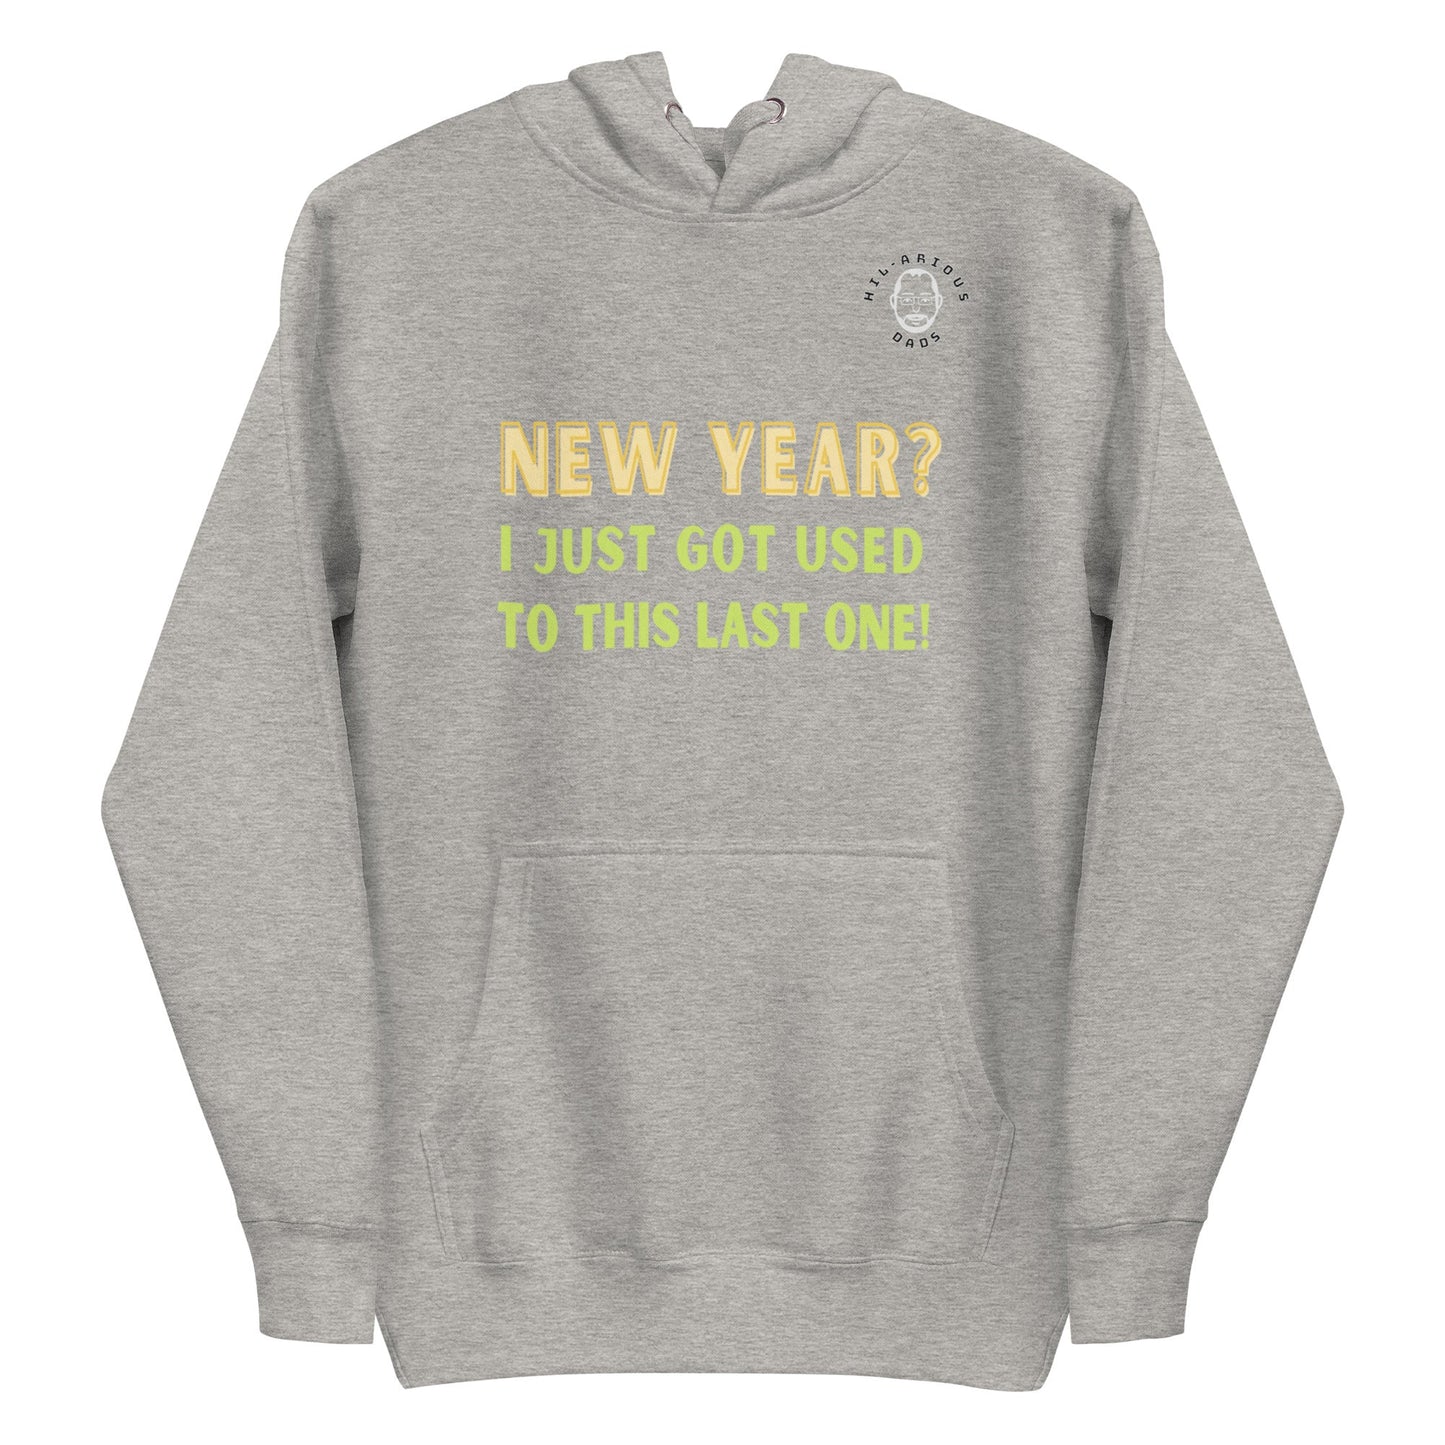 New Year? I just got used to this last one!-Hoodie - Hil-arious Dads